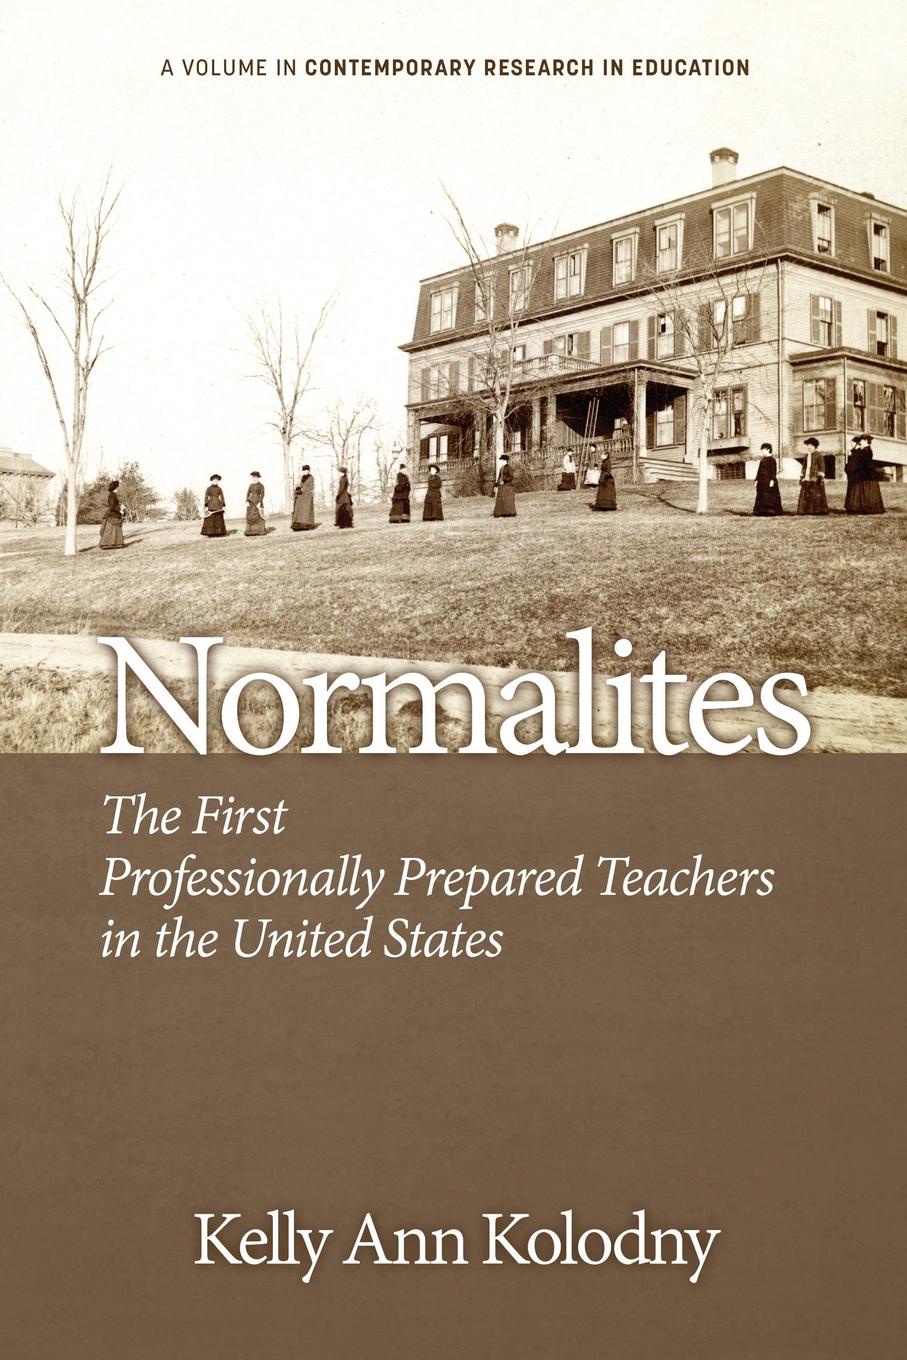 Normalites. The First Professionally Prepared Teachers in the United States